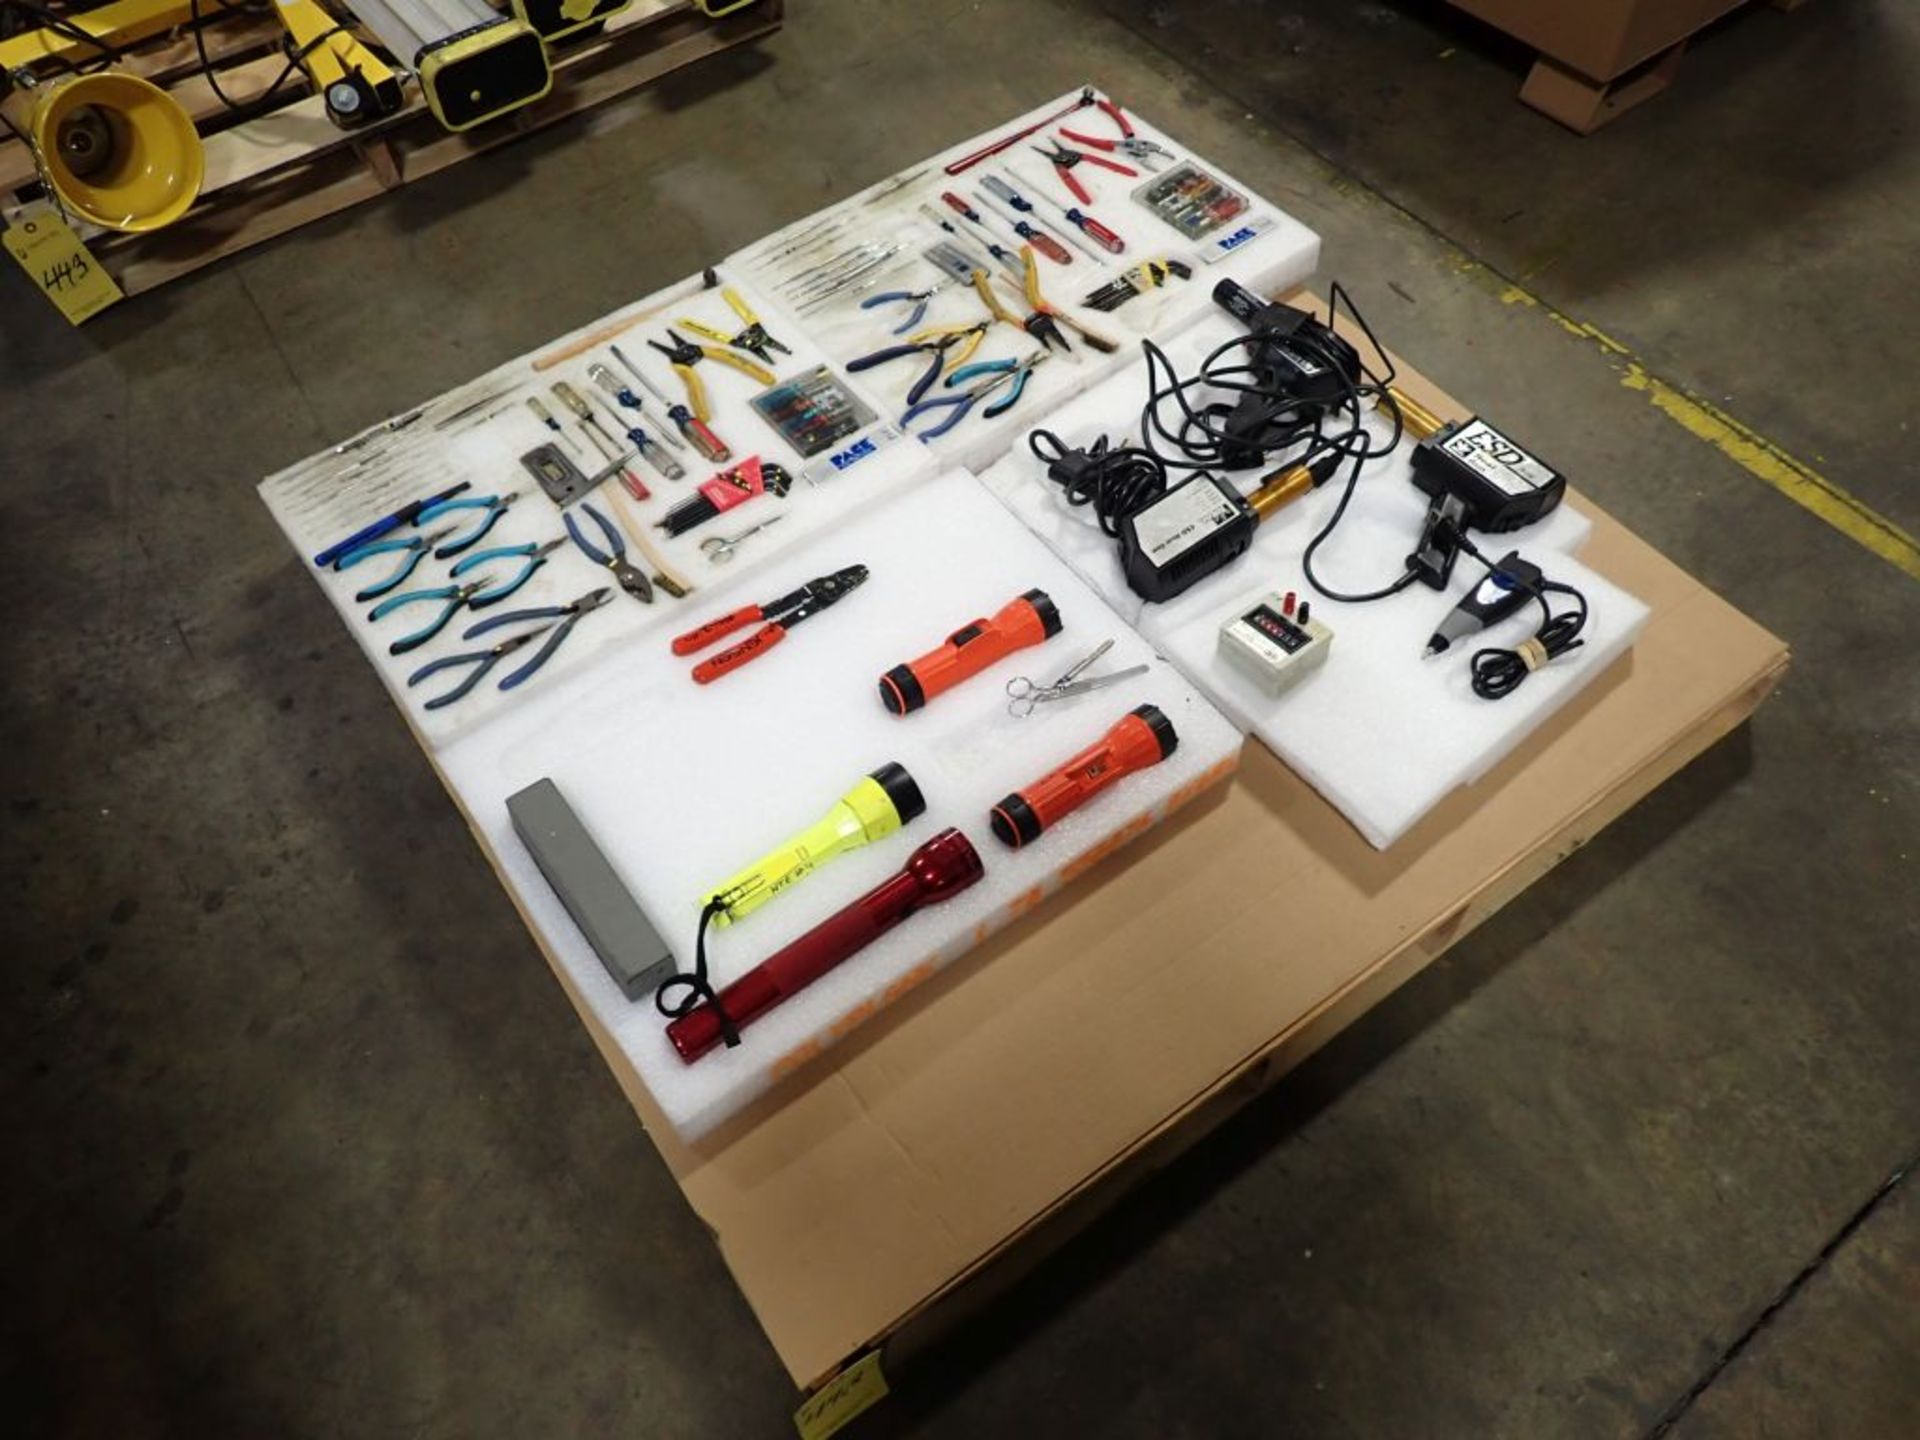 Lot of Assorted Tools & Flashlights | Tag: 241442 | Limited Forklift Assistance Available - $10.00